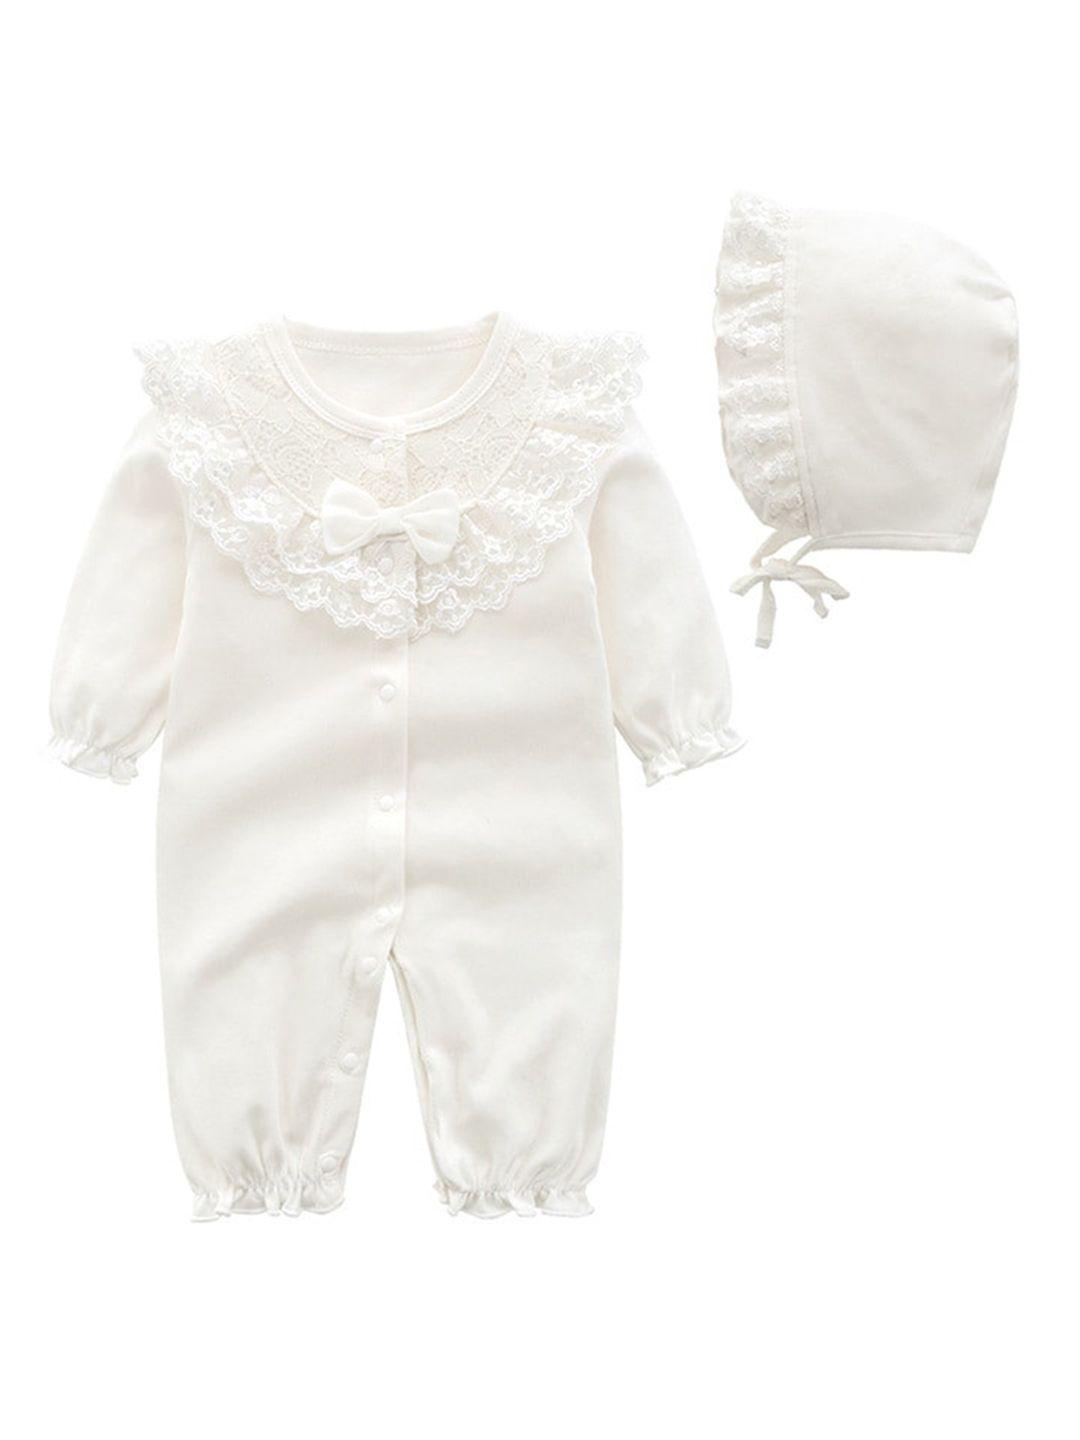 stylecast infant girls white cotton rompers with bonnet